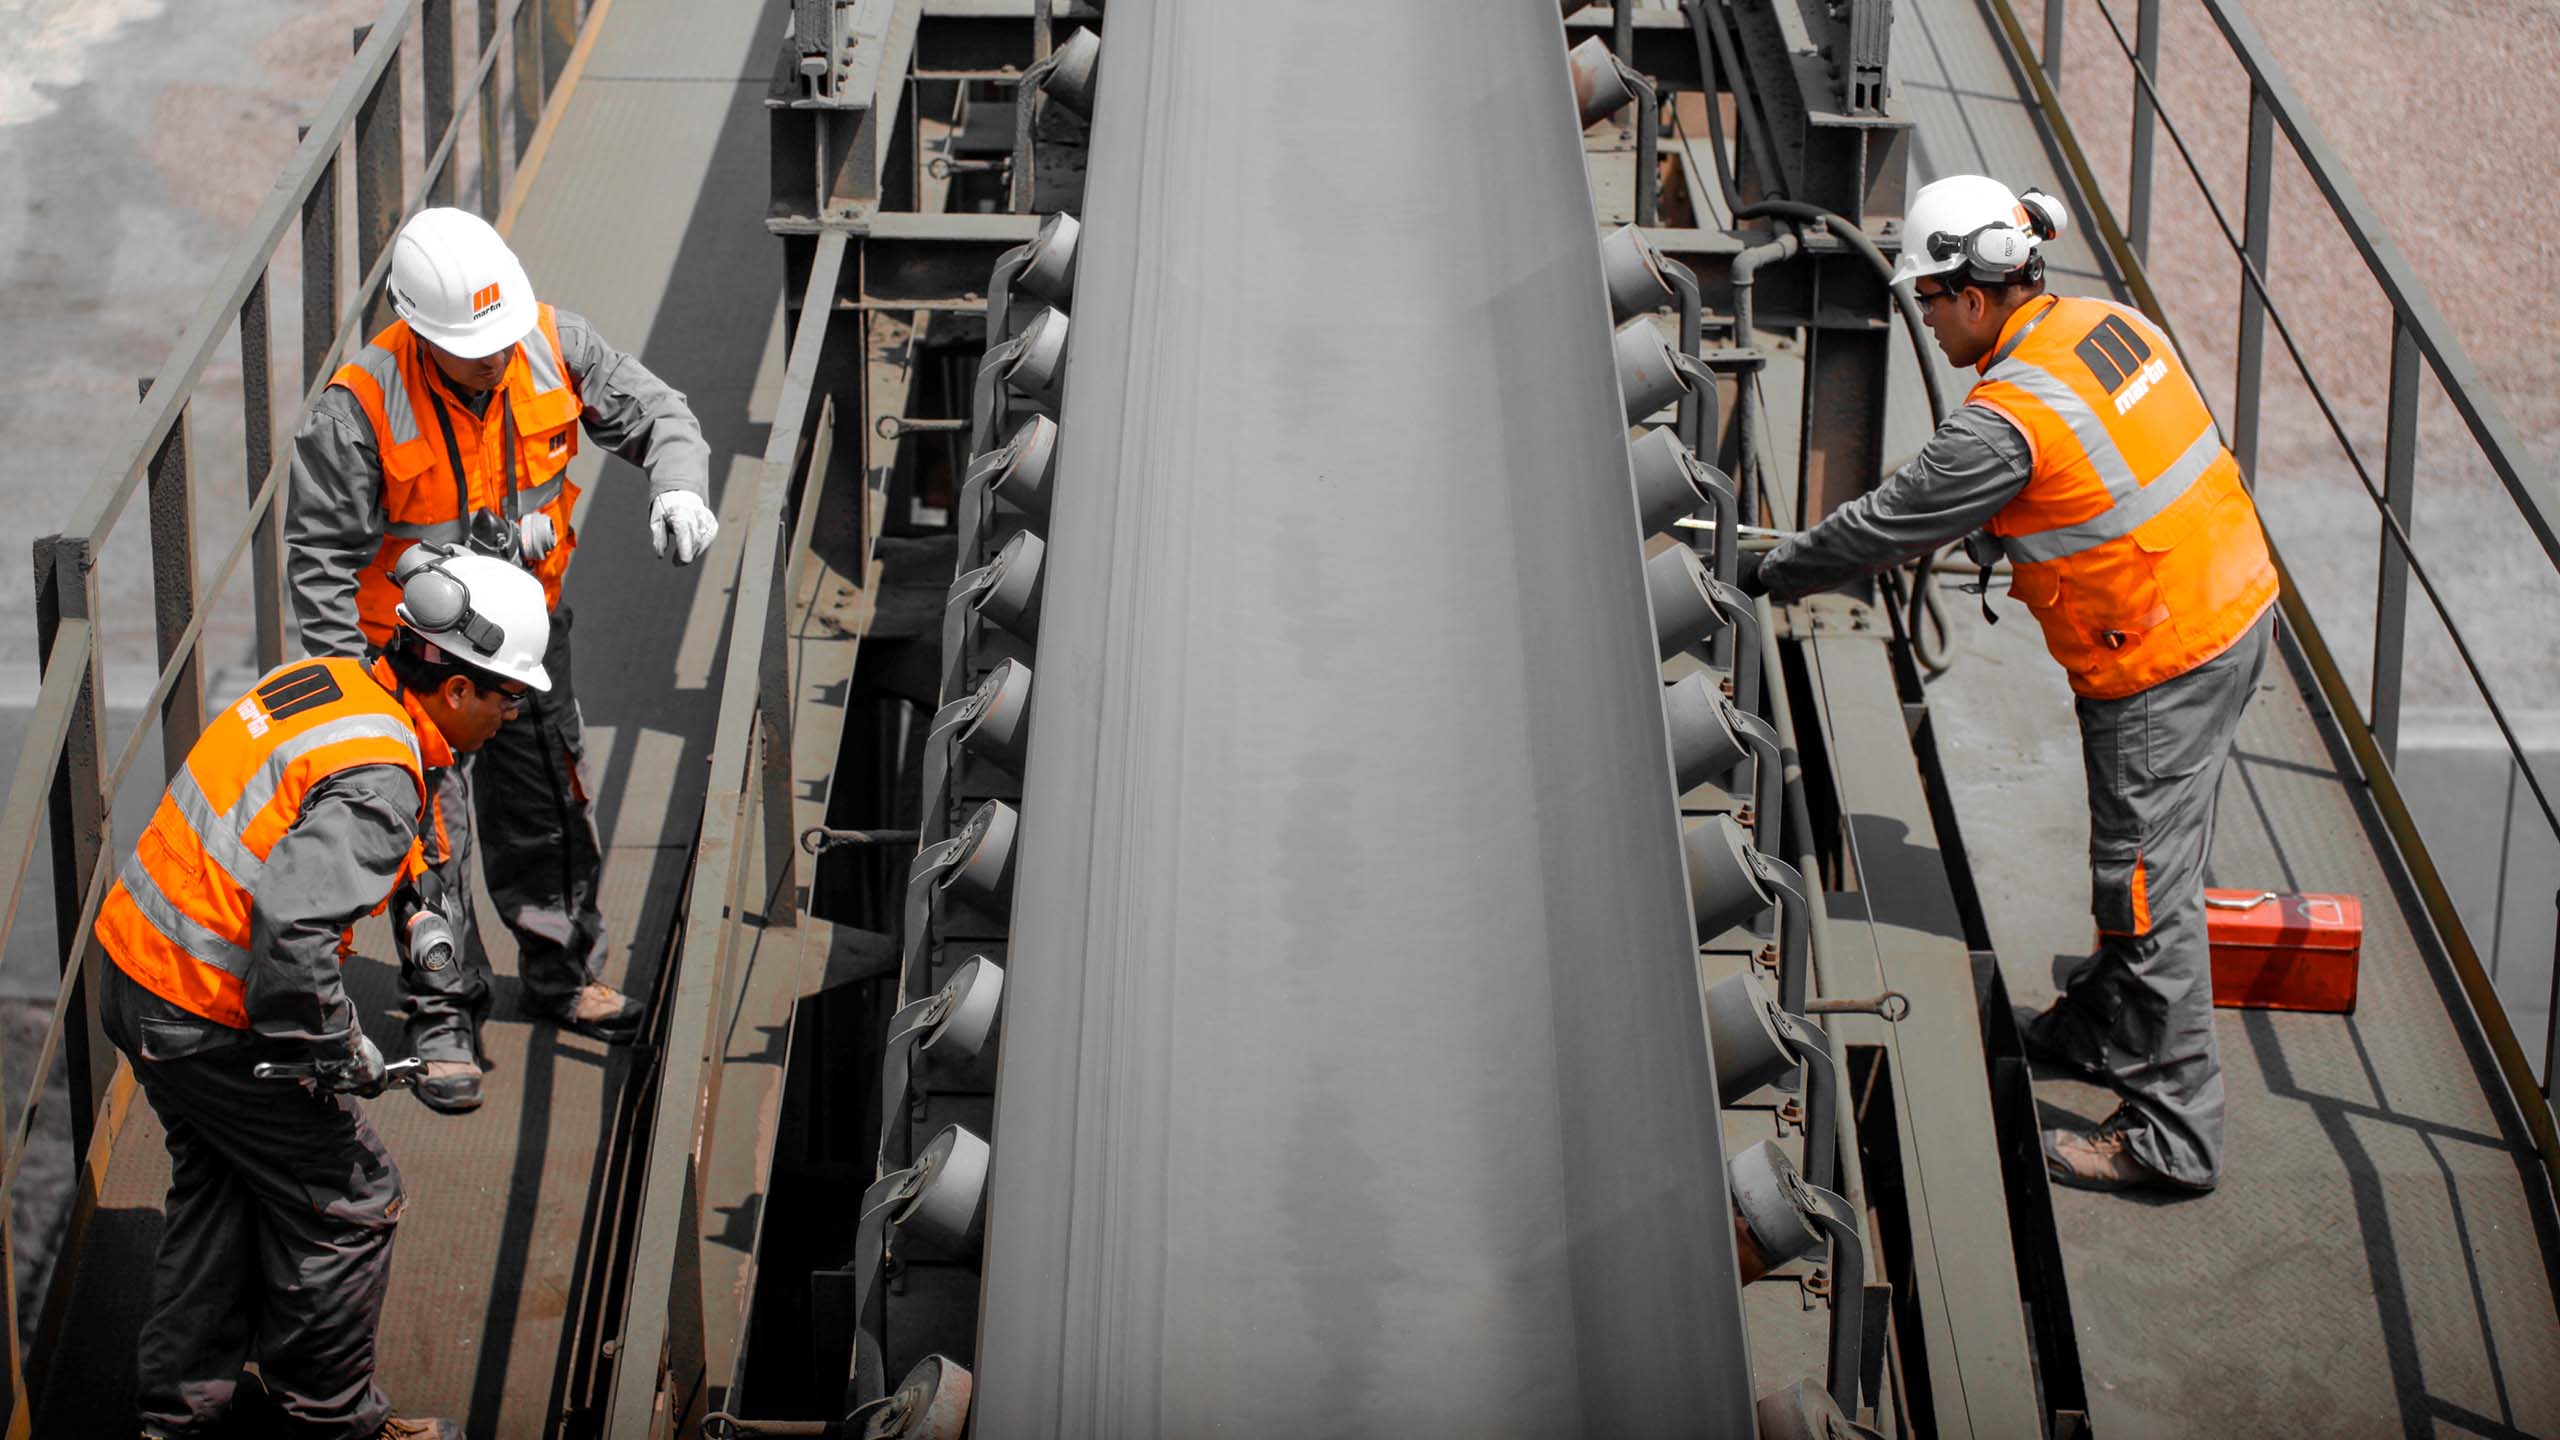 Workers inspect a belt conveyor system.